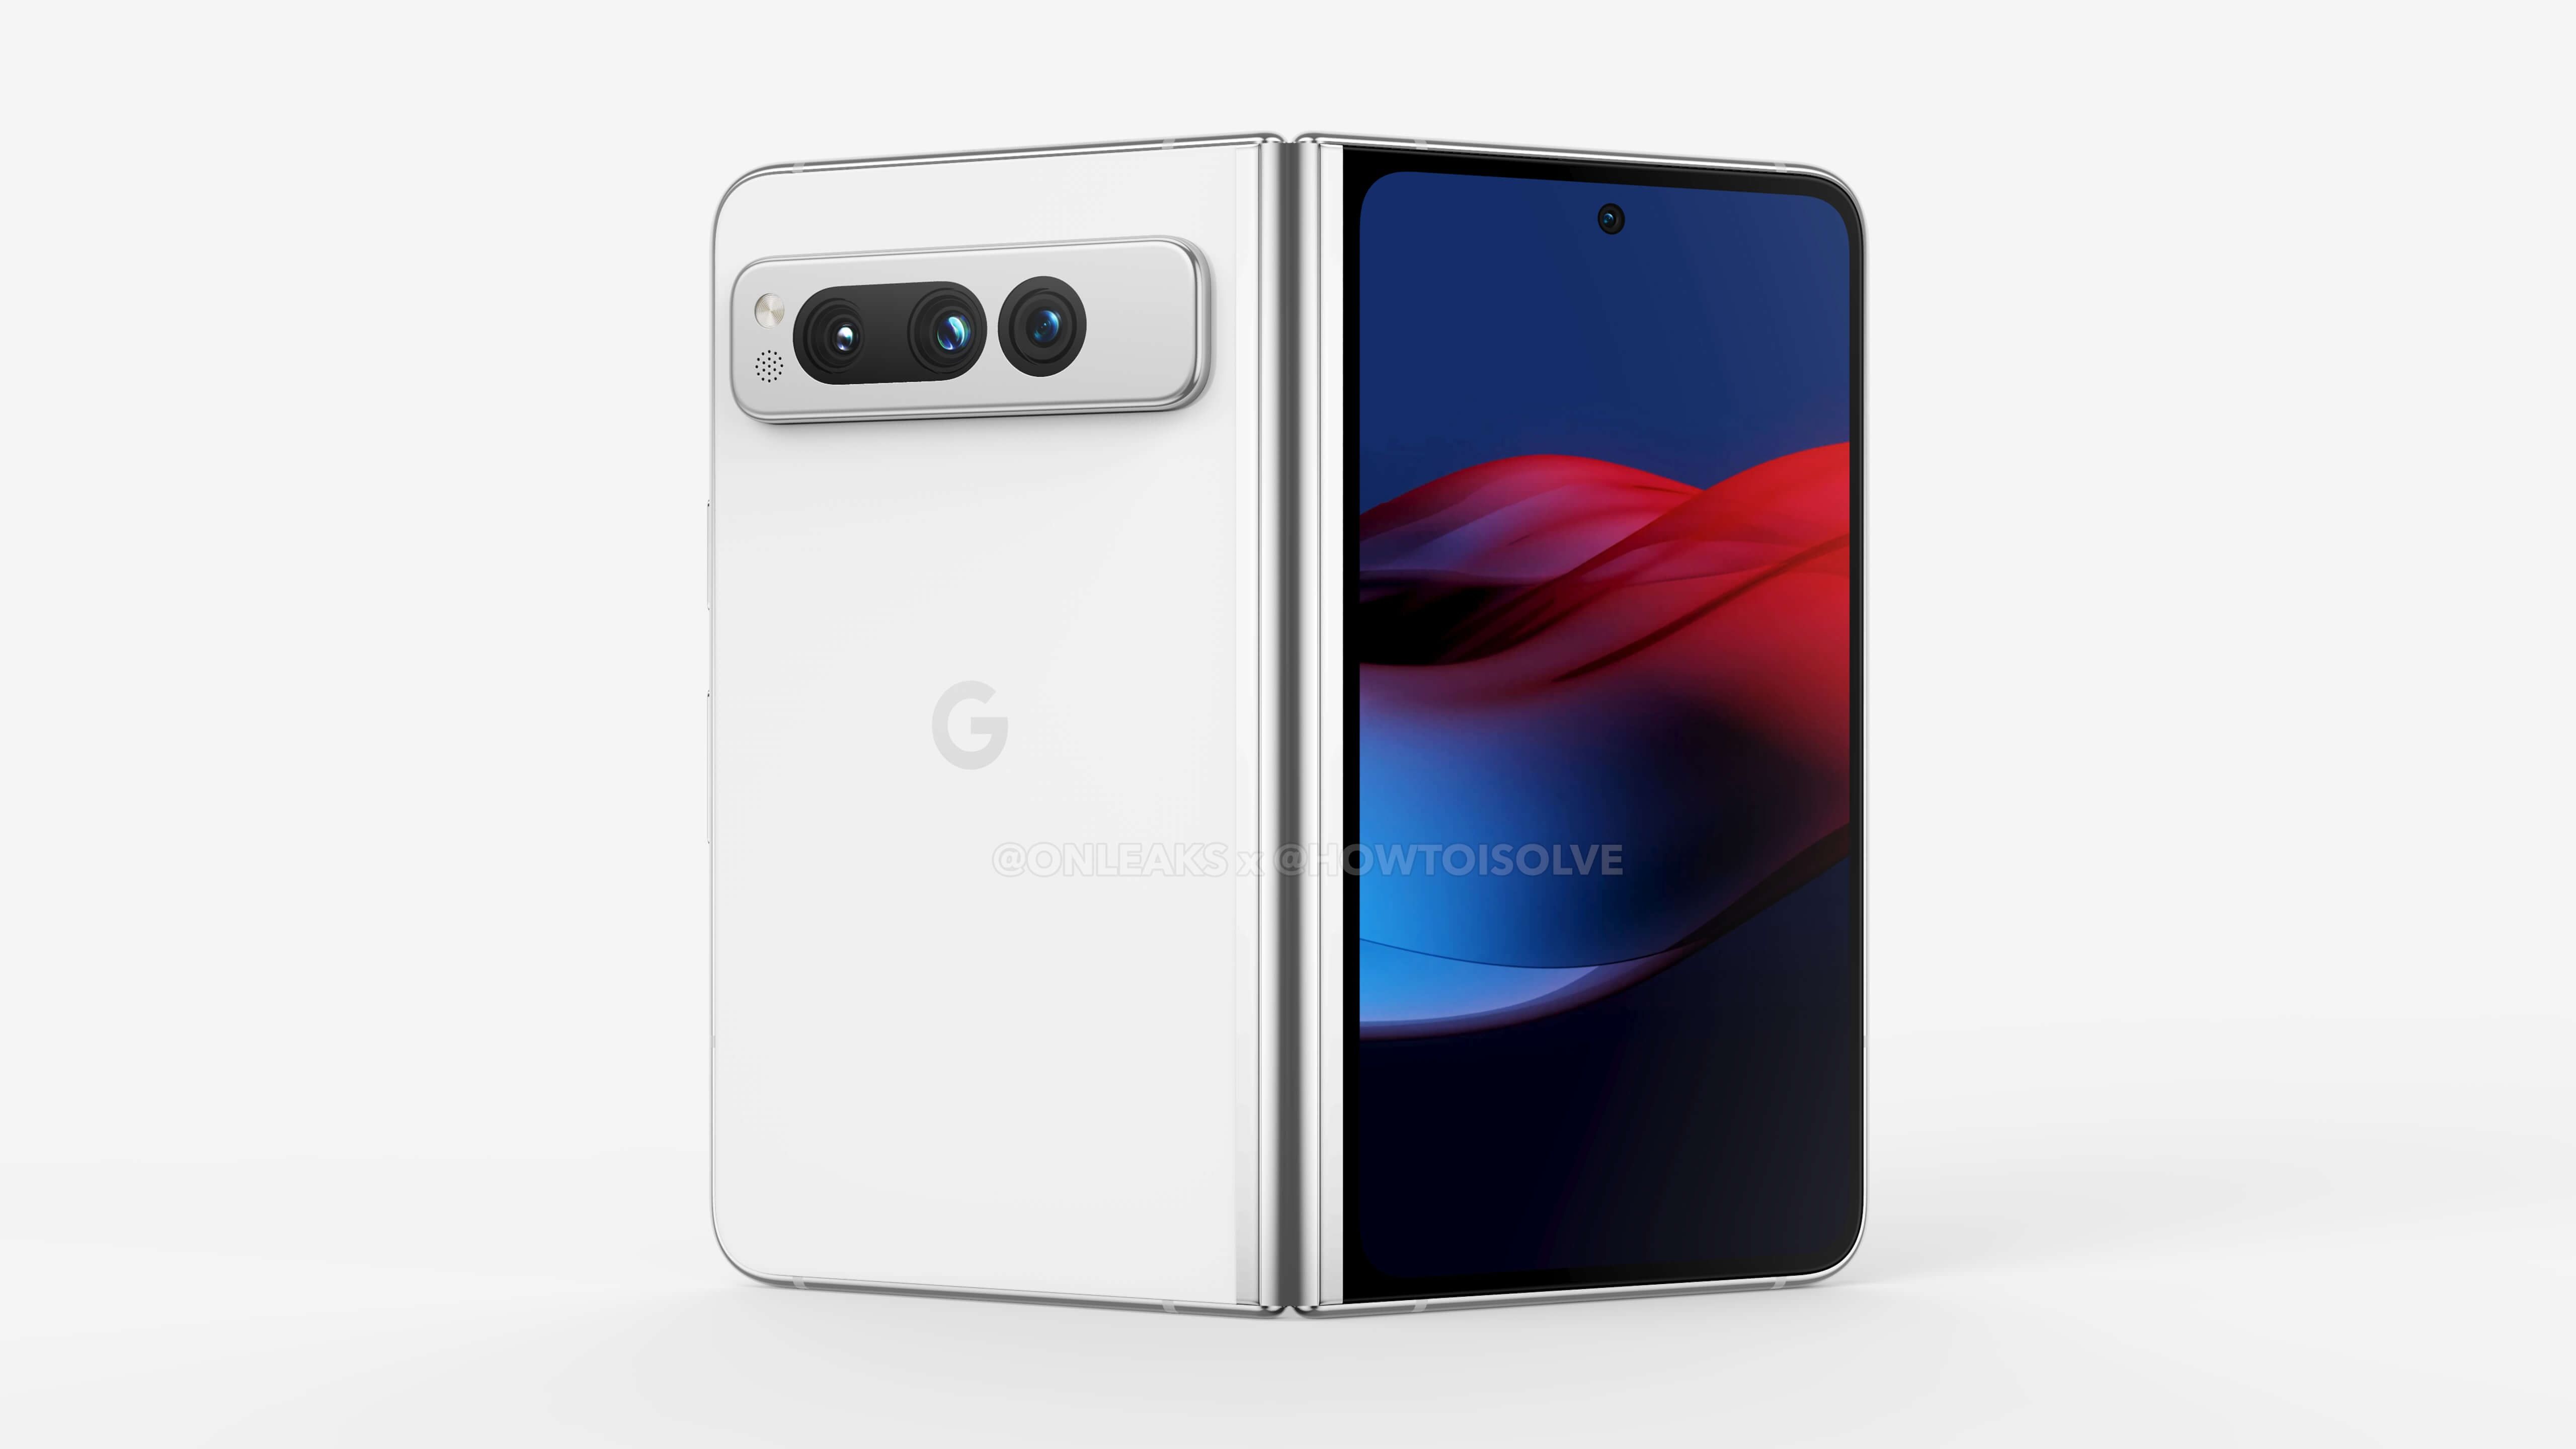 Leaked render of the Google Pixel Fold on a cream-colored background.